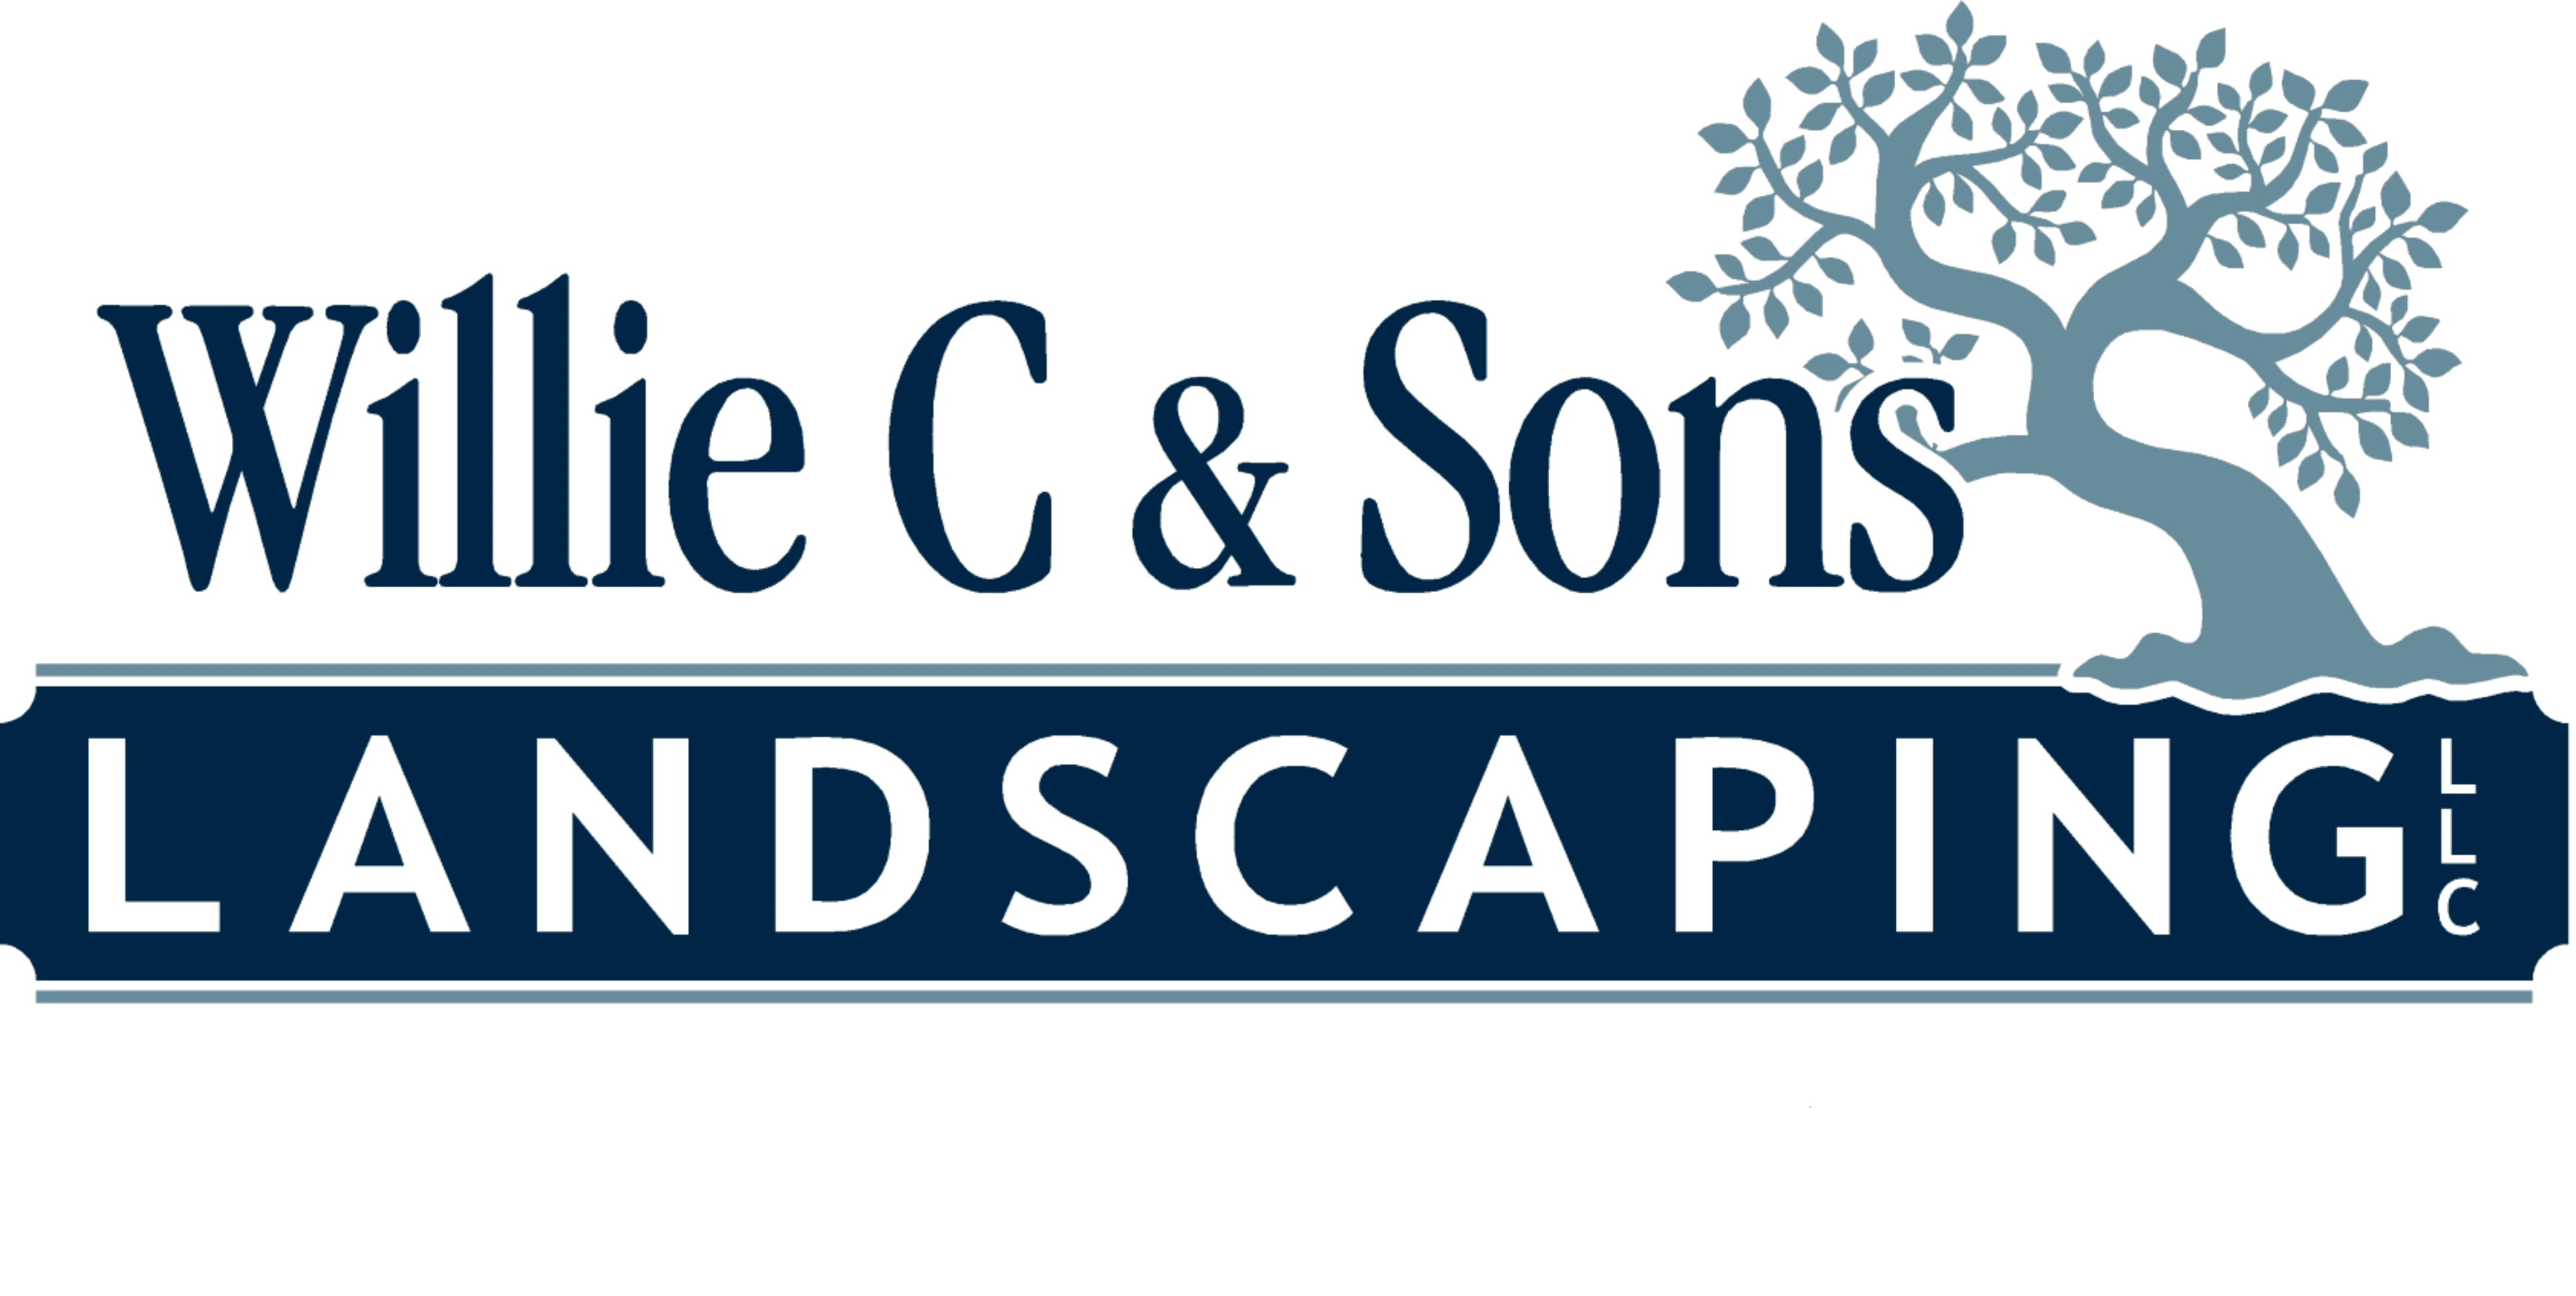 Willie C. & Sons Landscaping